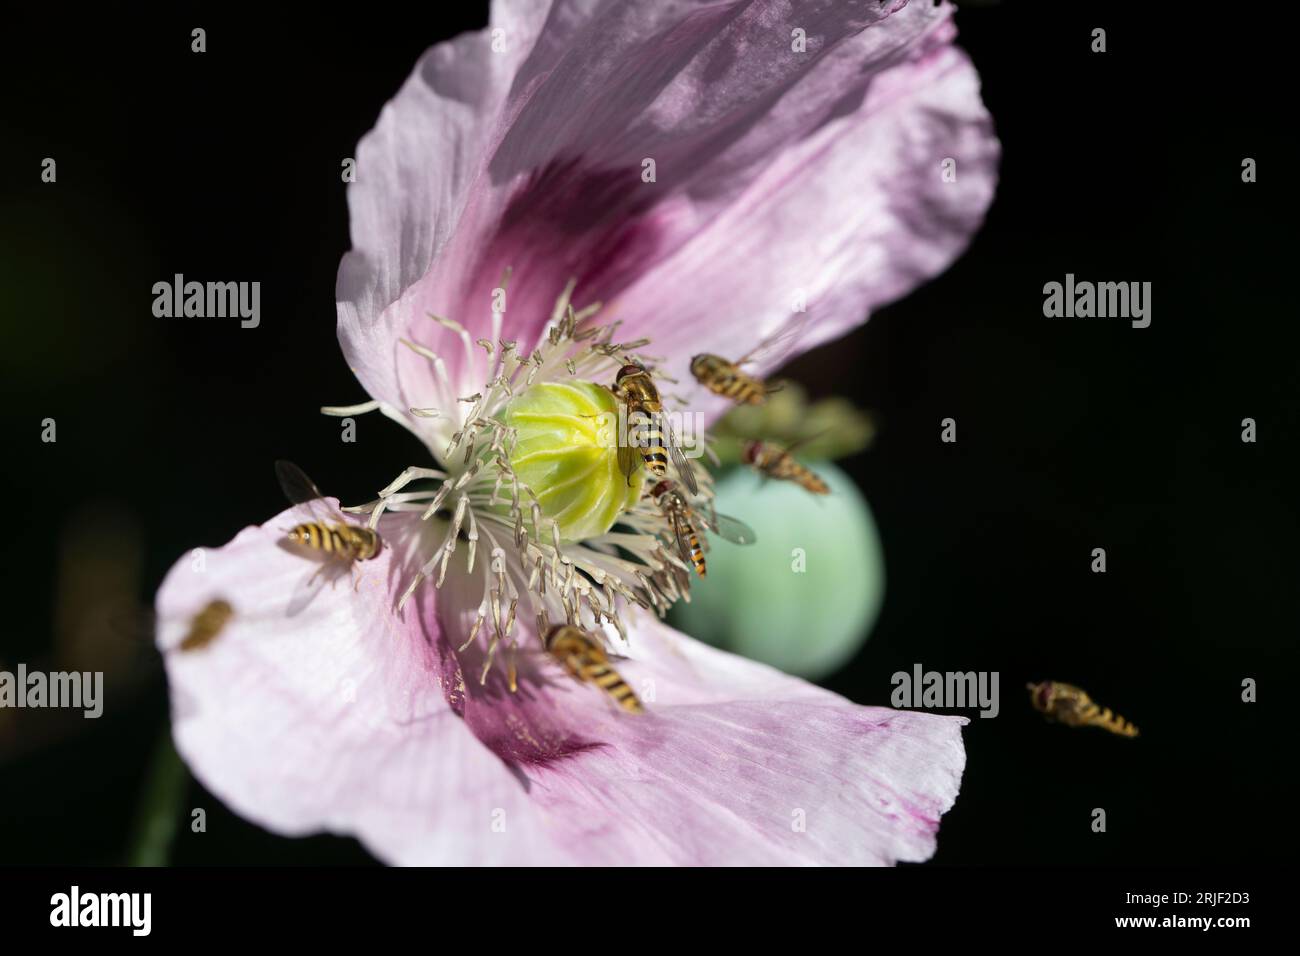 Opium poppy in flower pollinated by insects in a garden in summer, England, United Kingdom Stock Photo